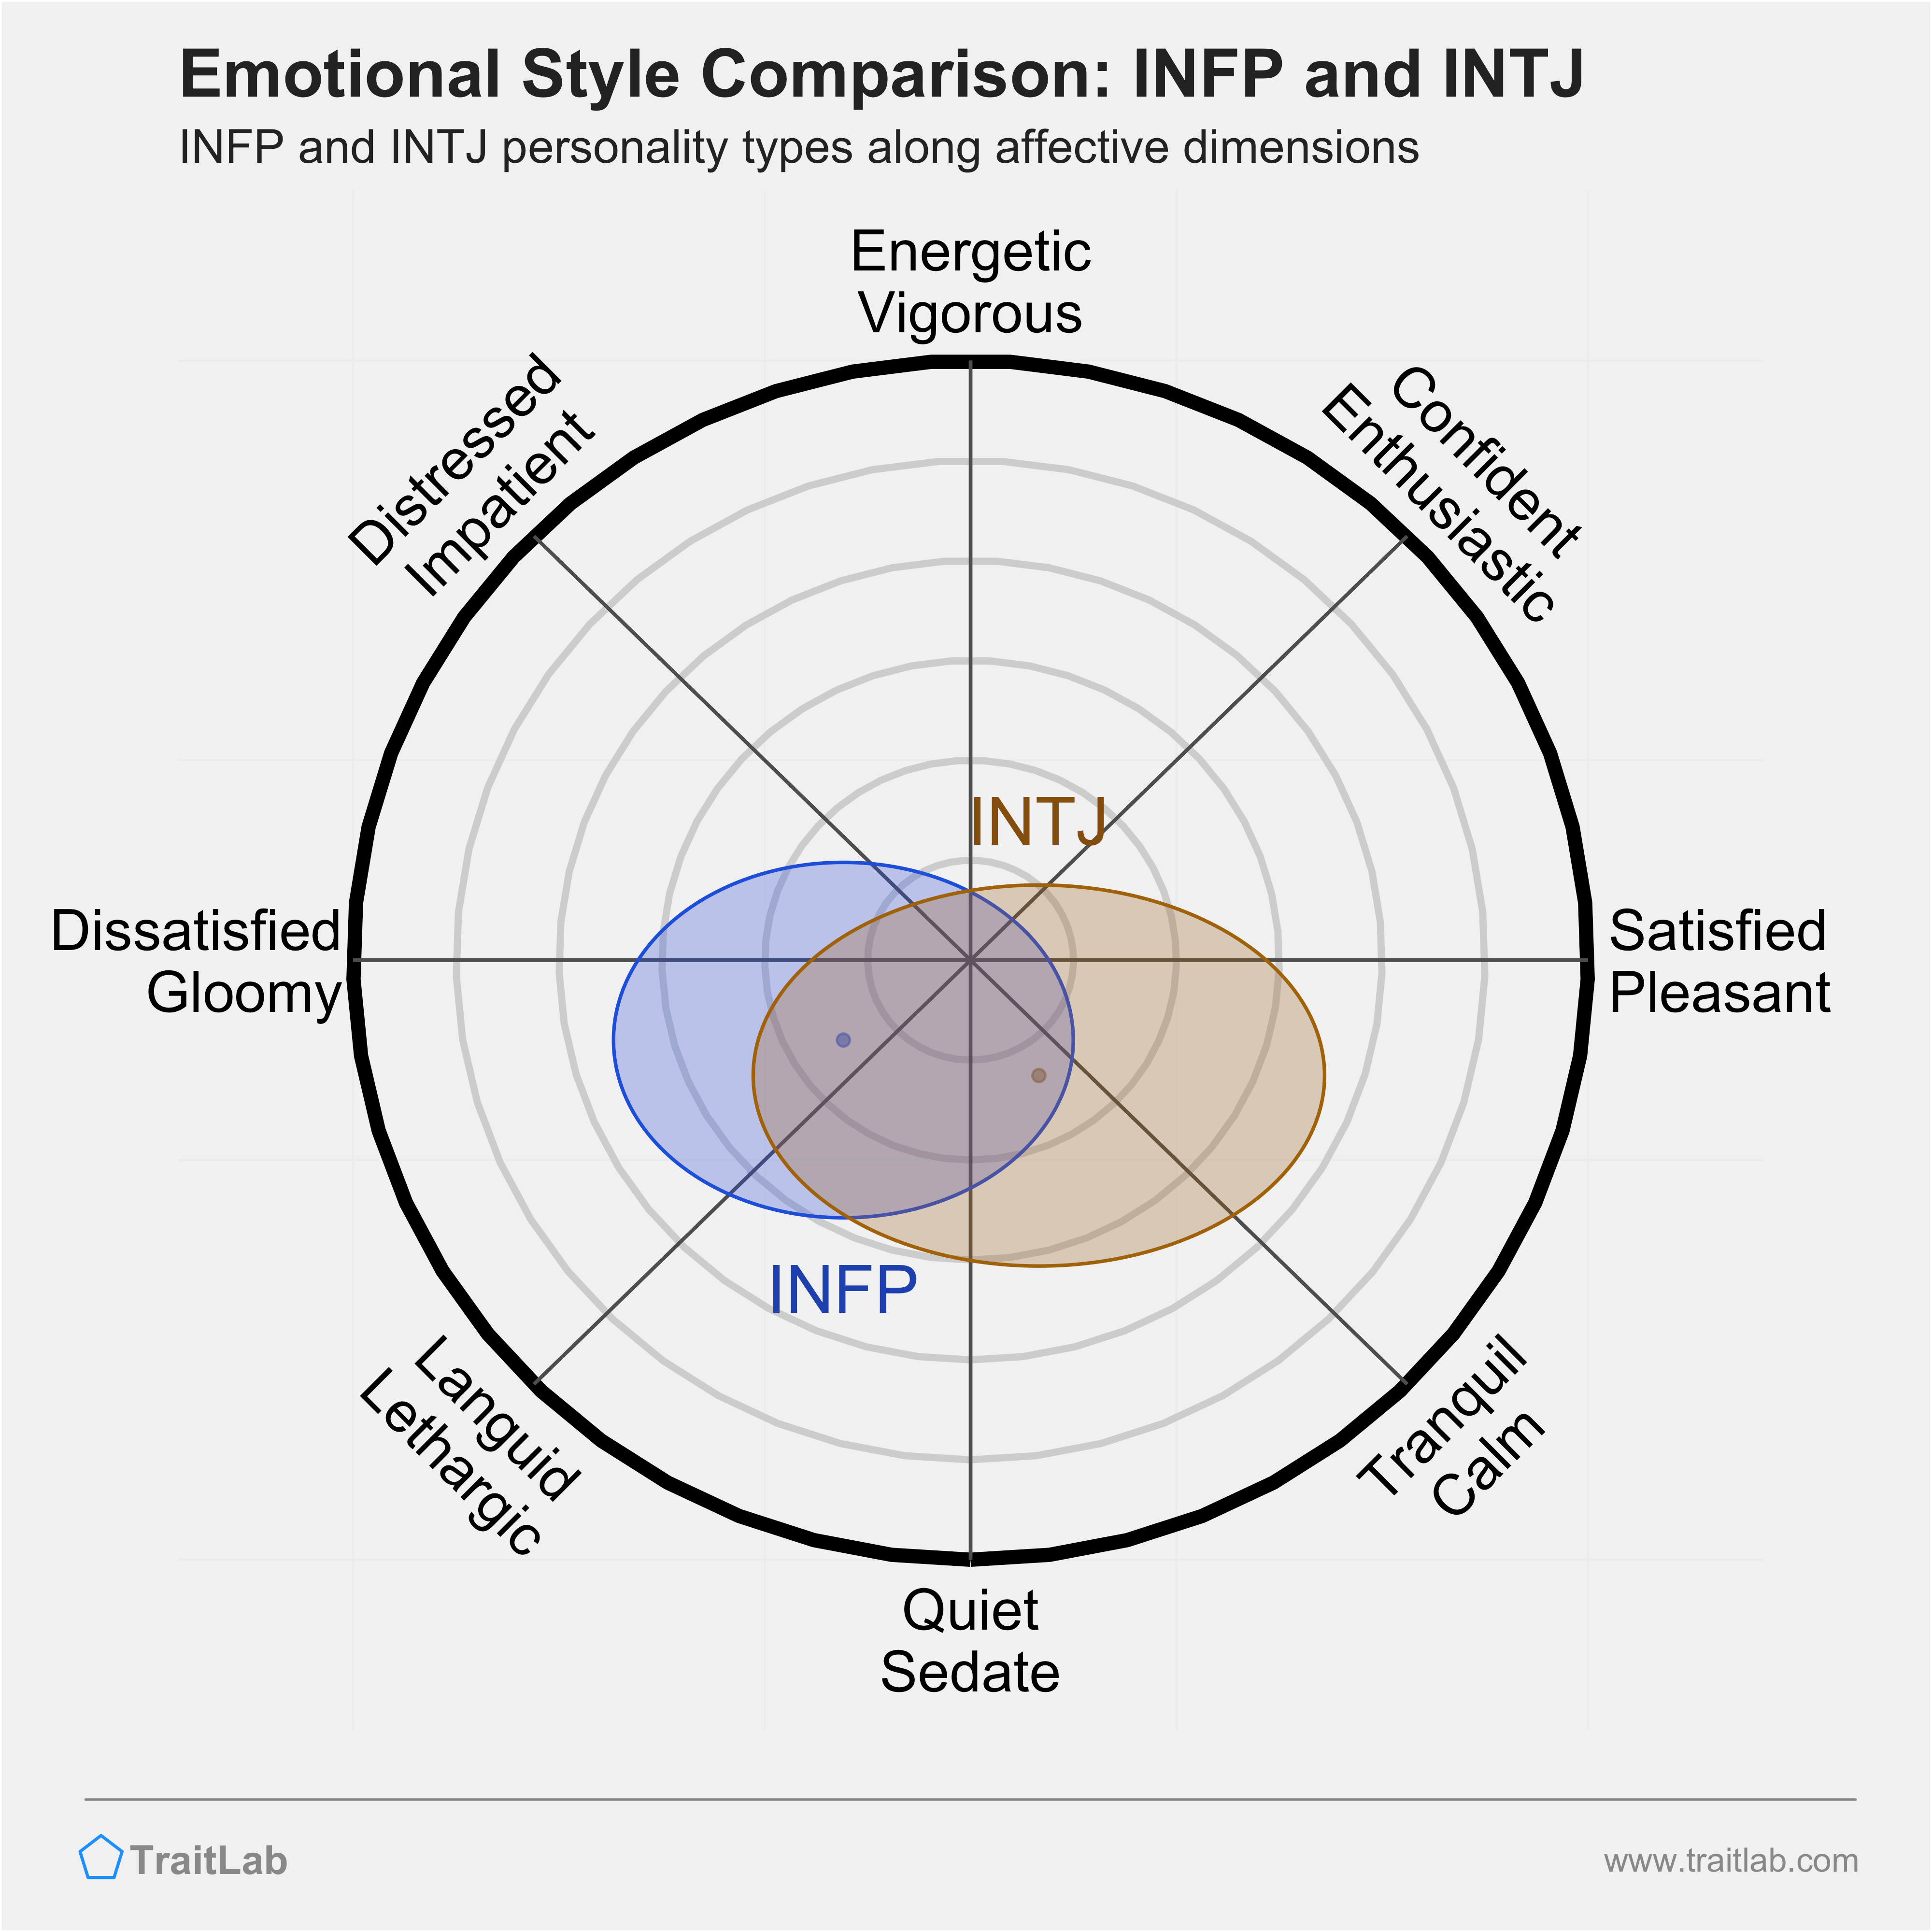 INFP and INTJ comparison across emotional (affective) dimensions